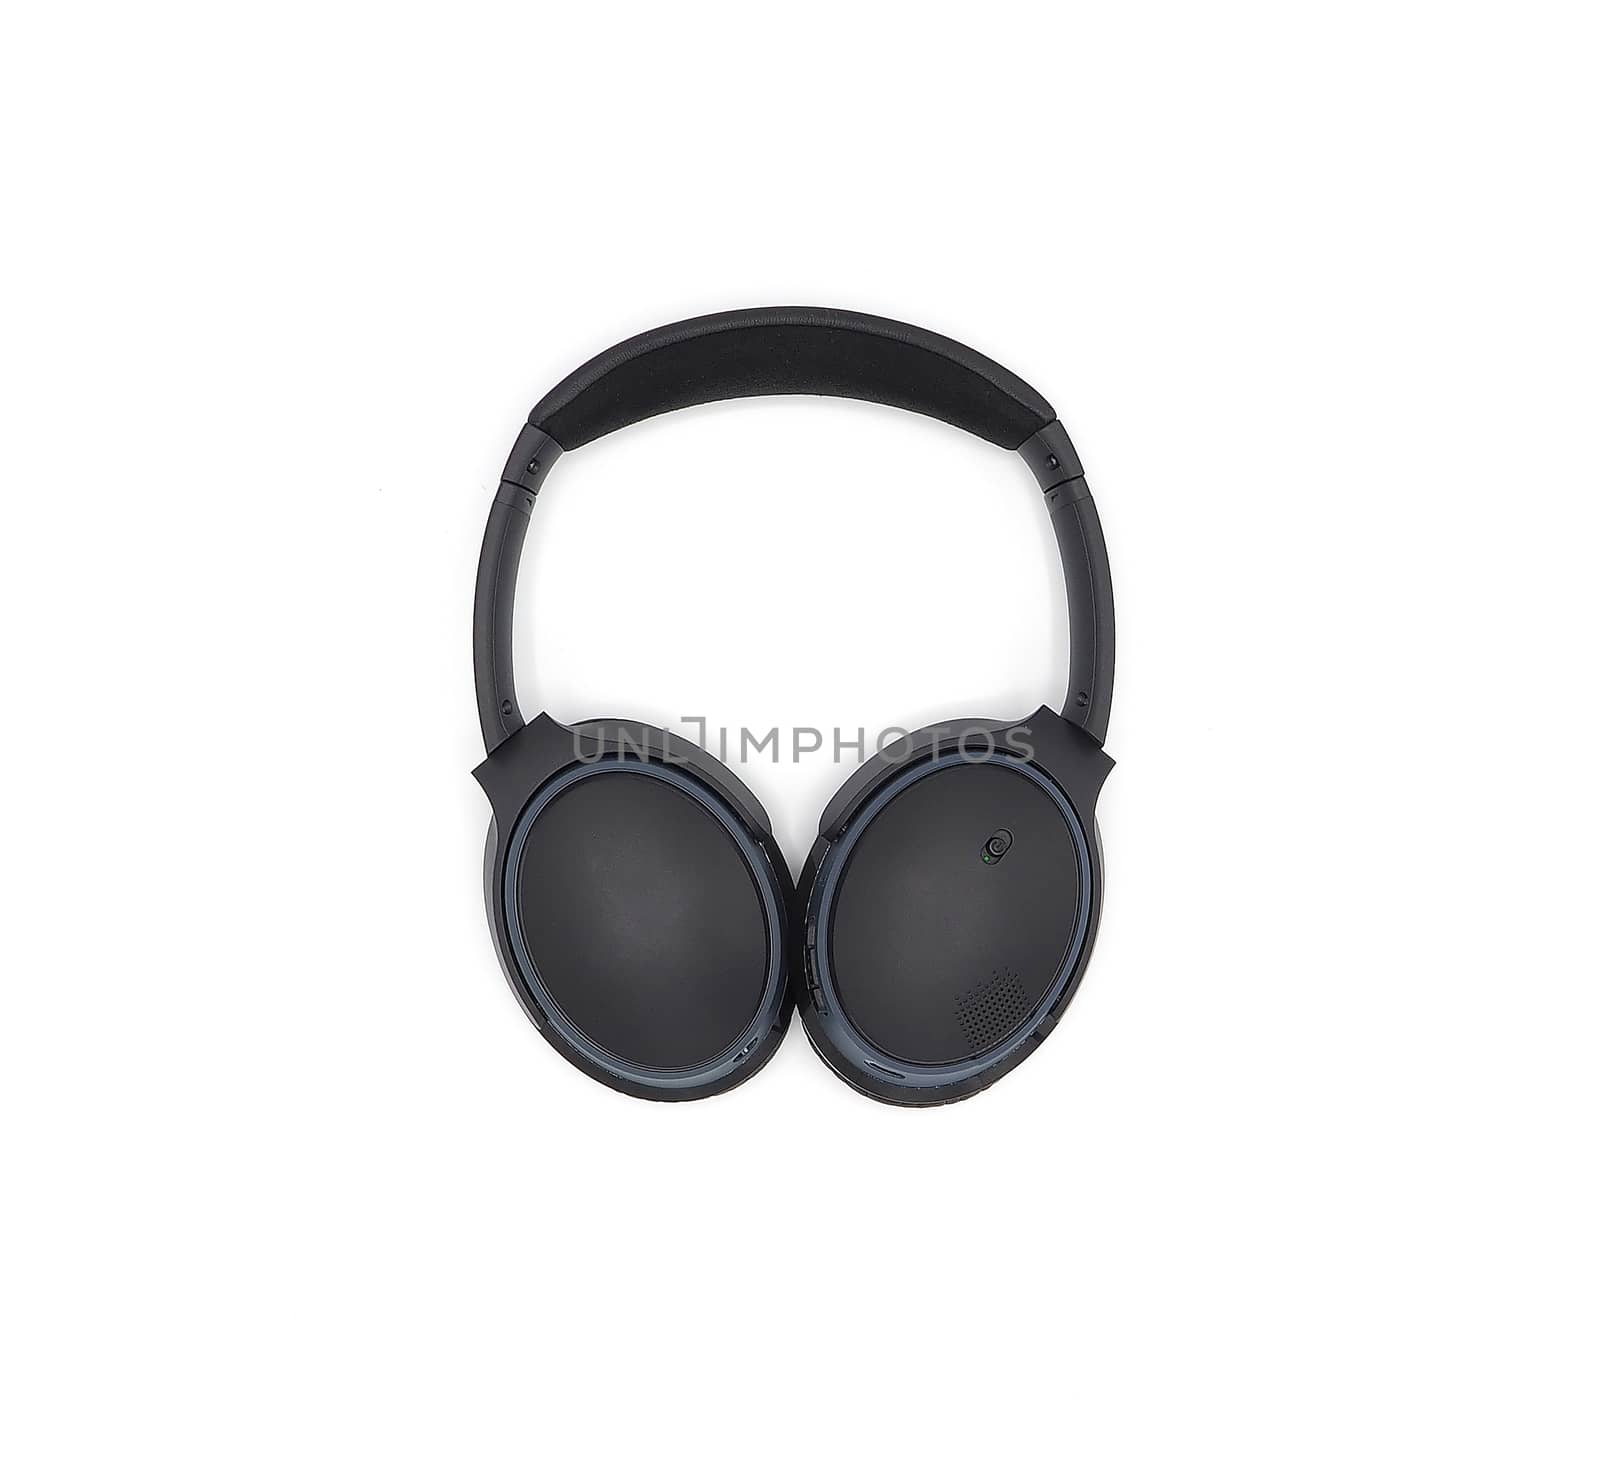 Black wireless headphone around ears and white background and isolated.